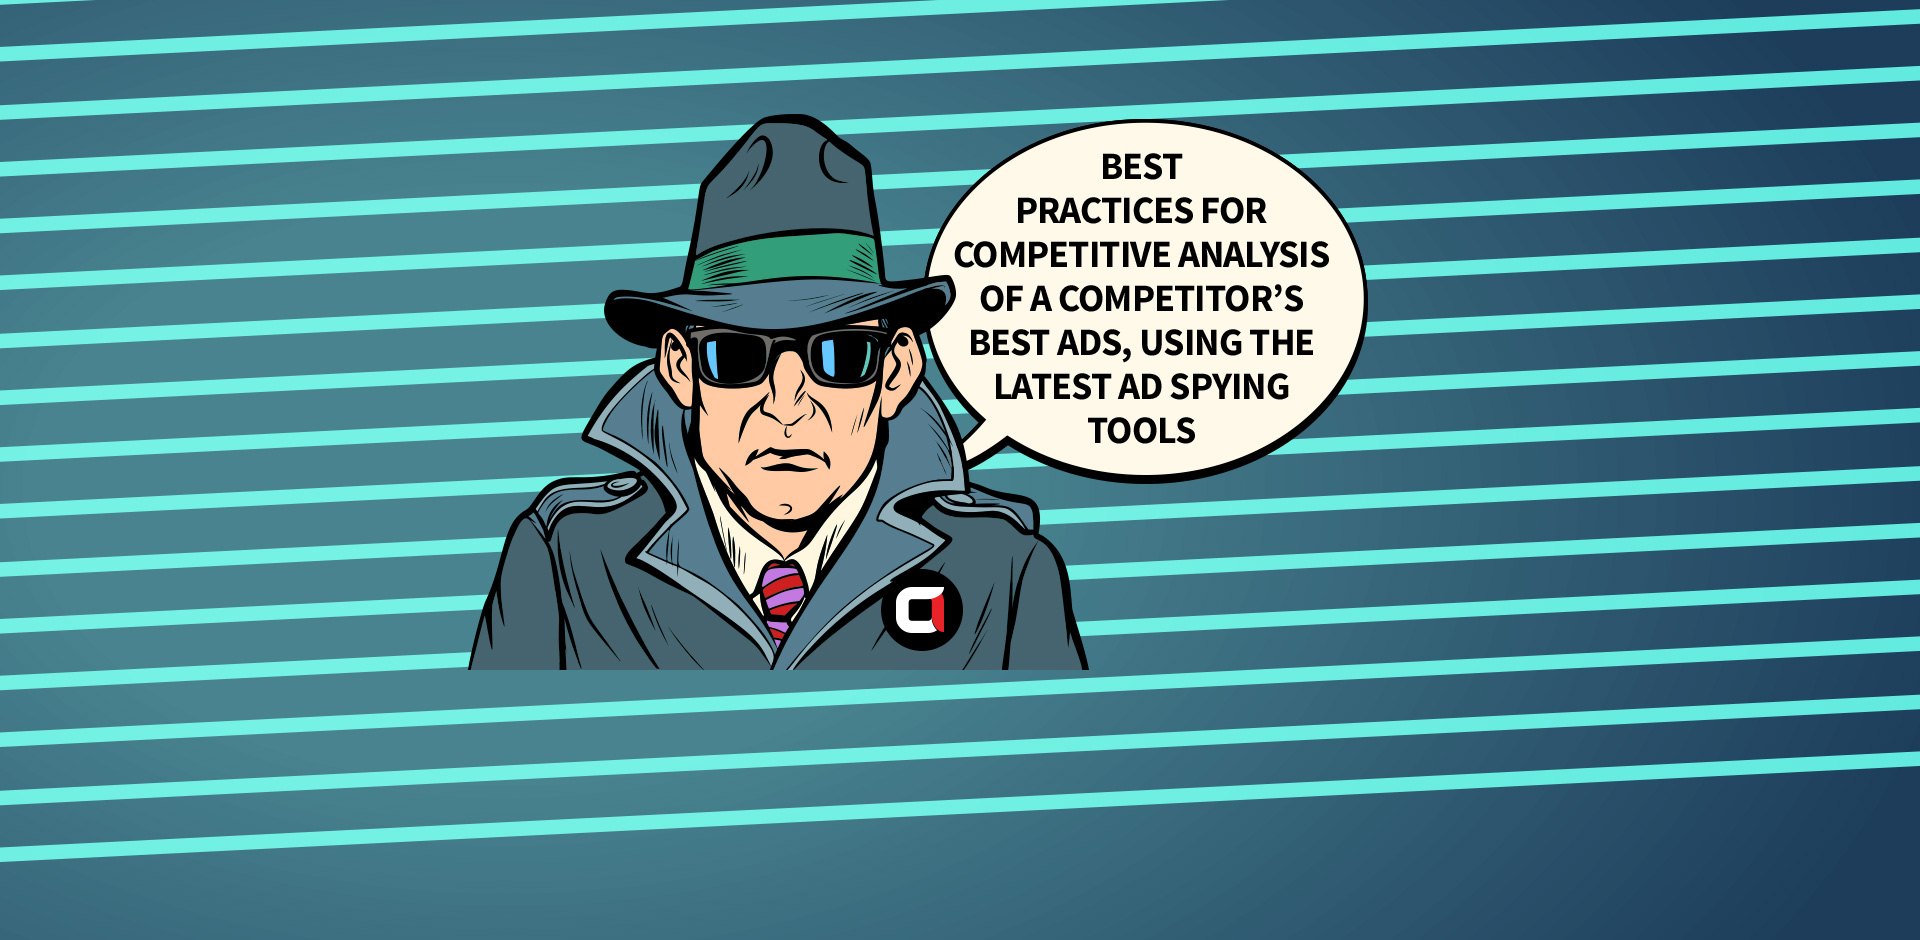 Facebook and Google App Campaign Best Practices for Competitive Analysis of a Competitor’s Best Ads, Using the Latest Ad Spying Tools